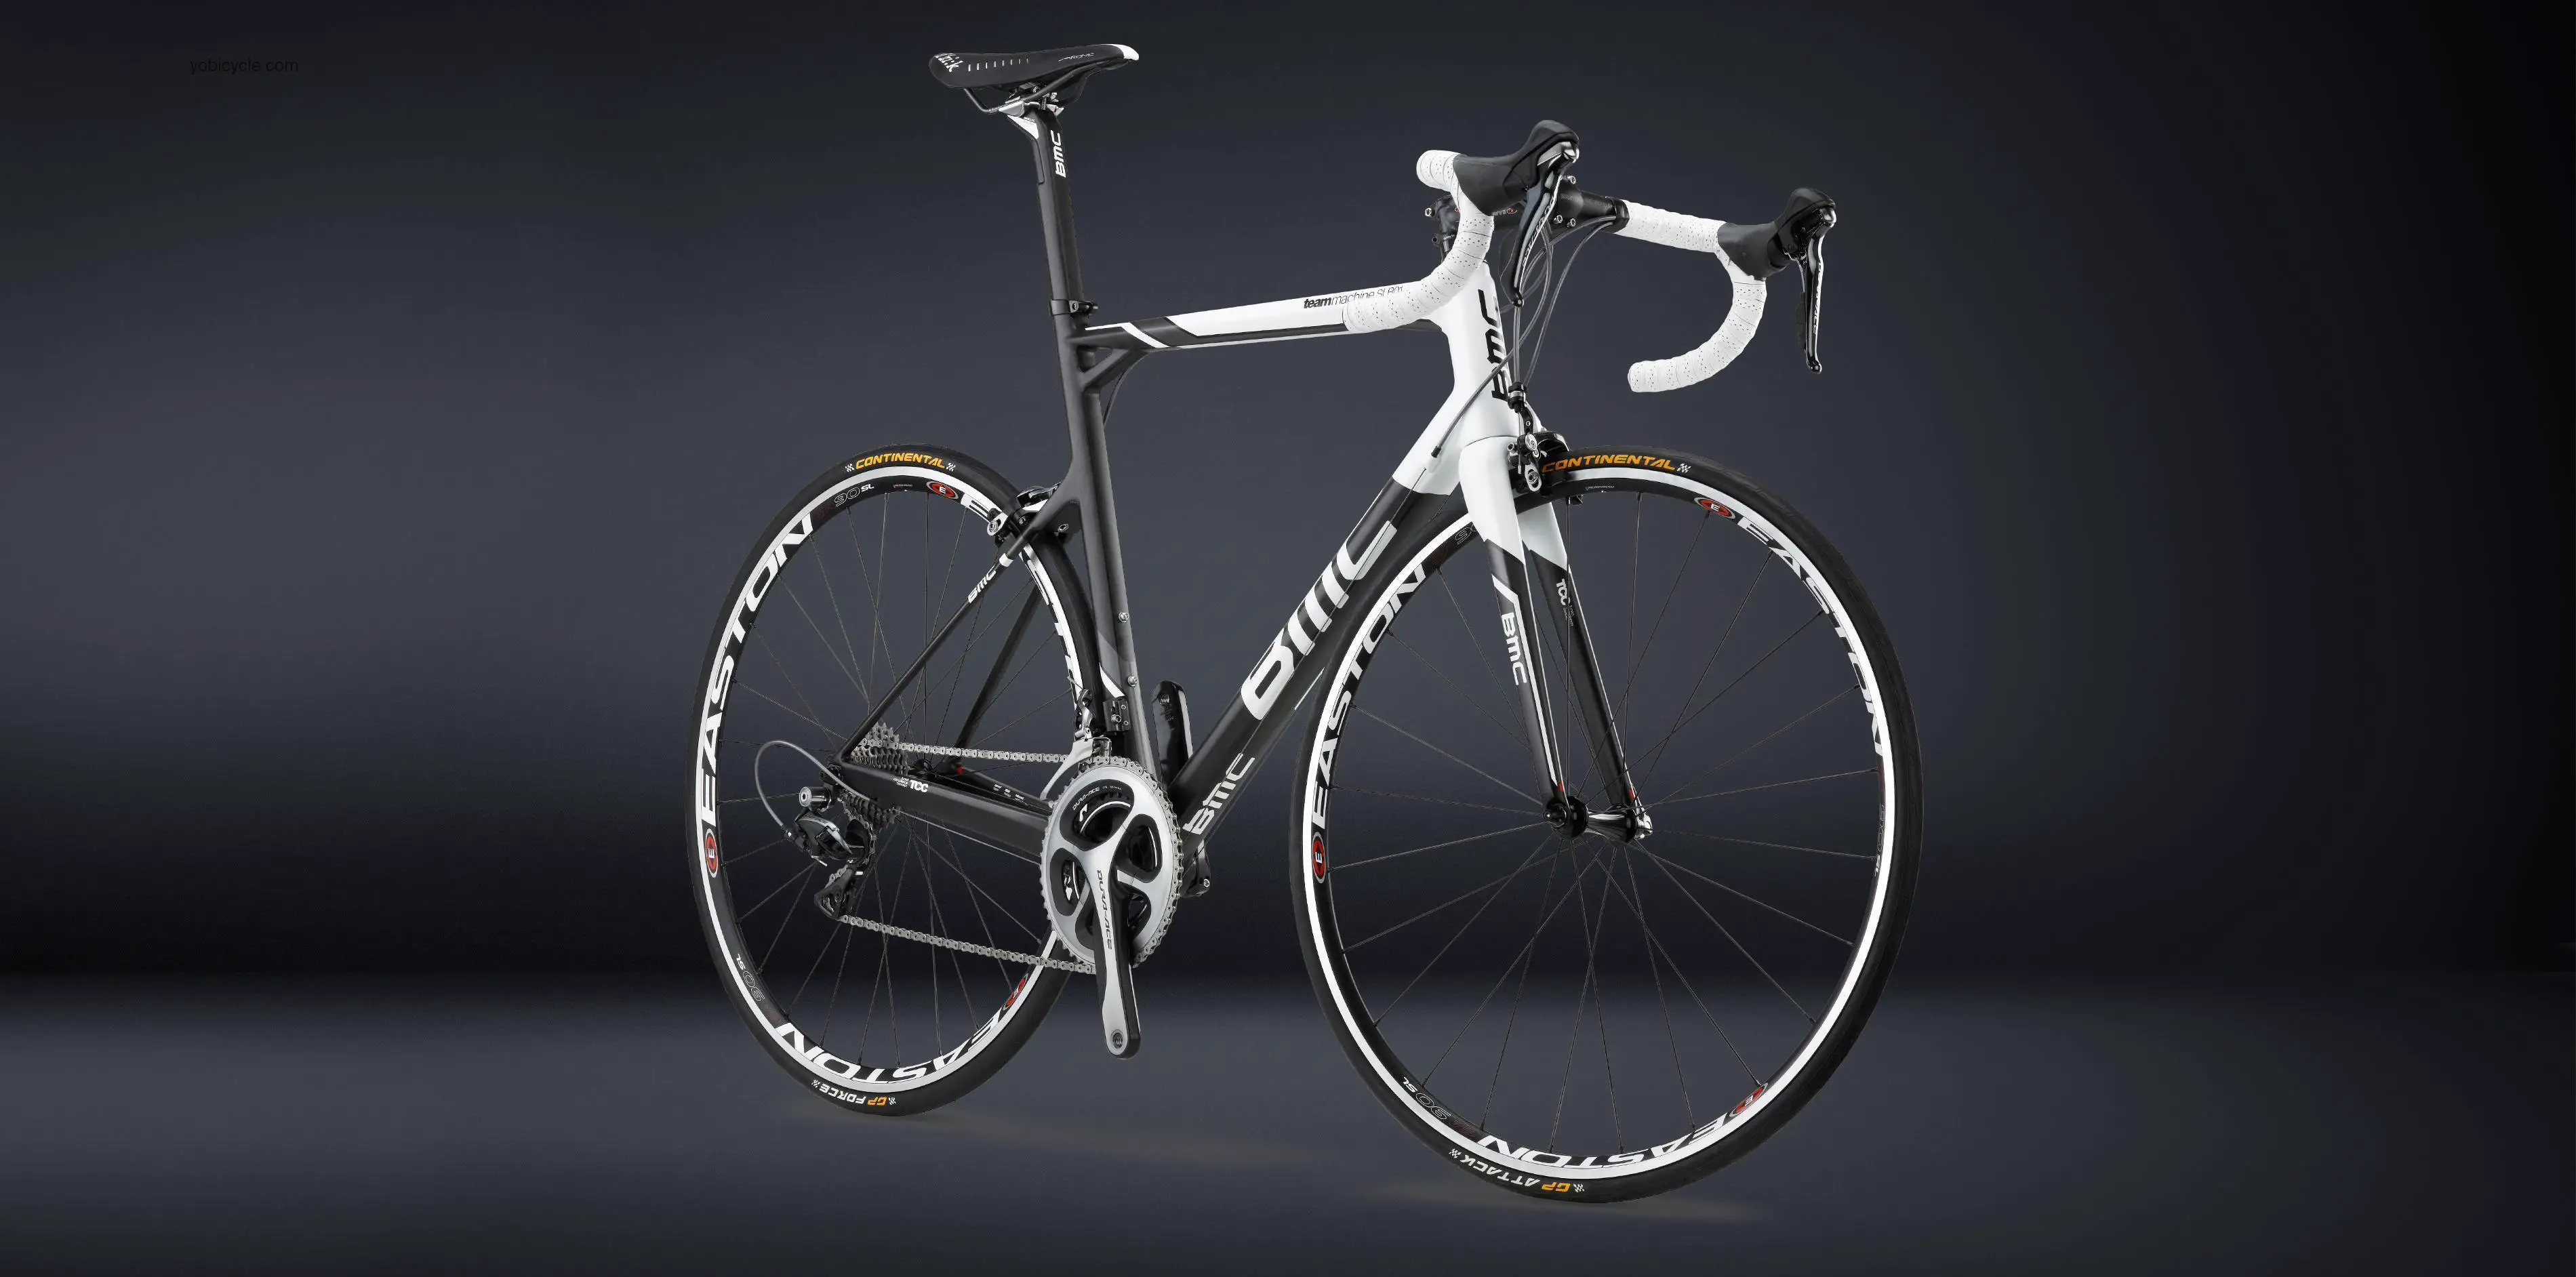 BMC  SLR01 Dura Ace Technical data and specifications